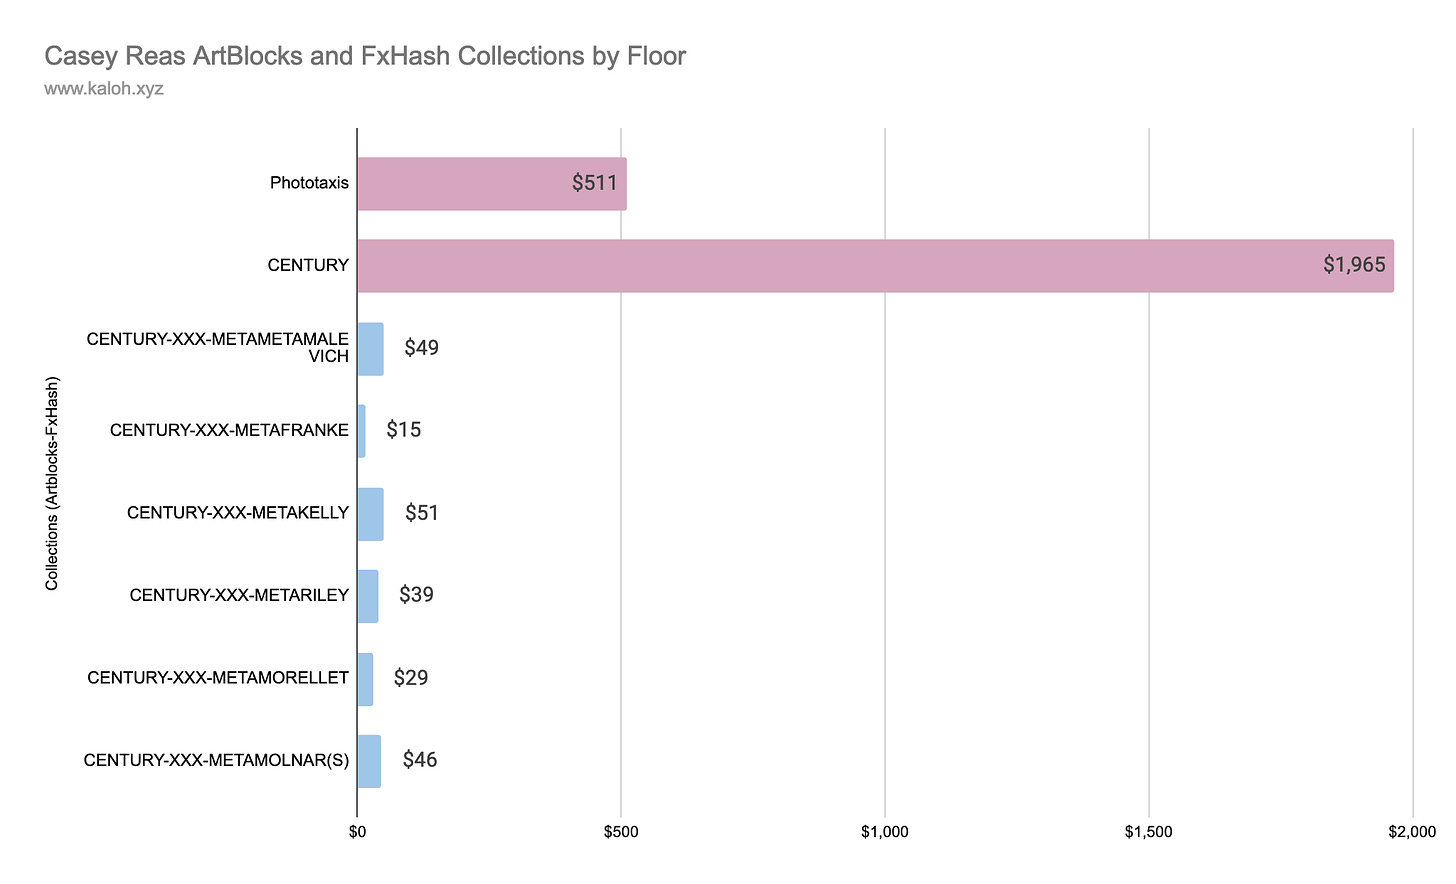 Casey Reas’ collections floors are very different across both platforms. Editions aren’t a factor, as all the collections have exactly 1k pieces.